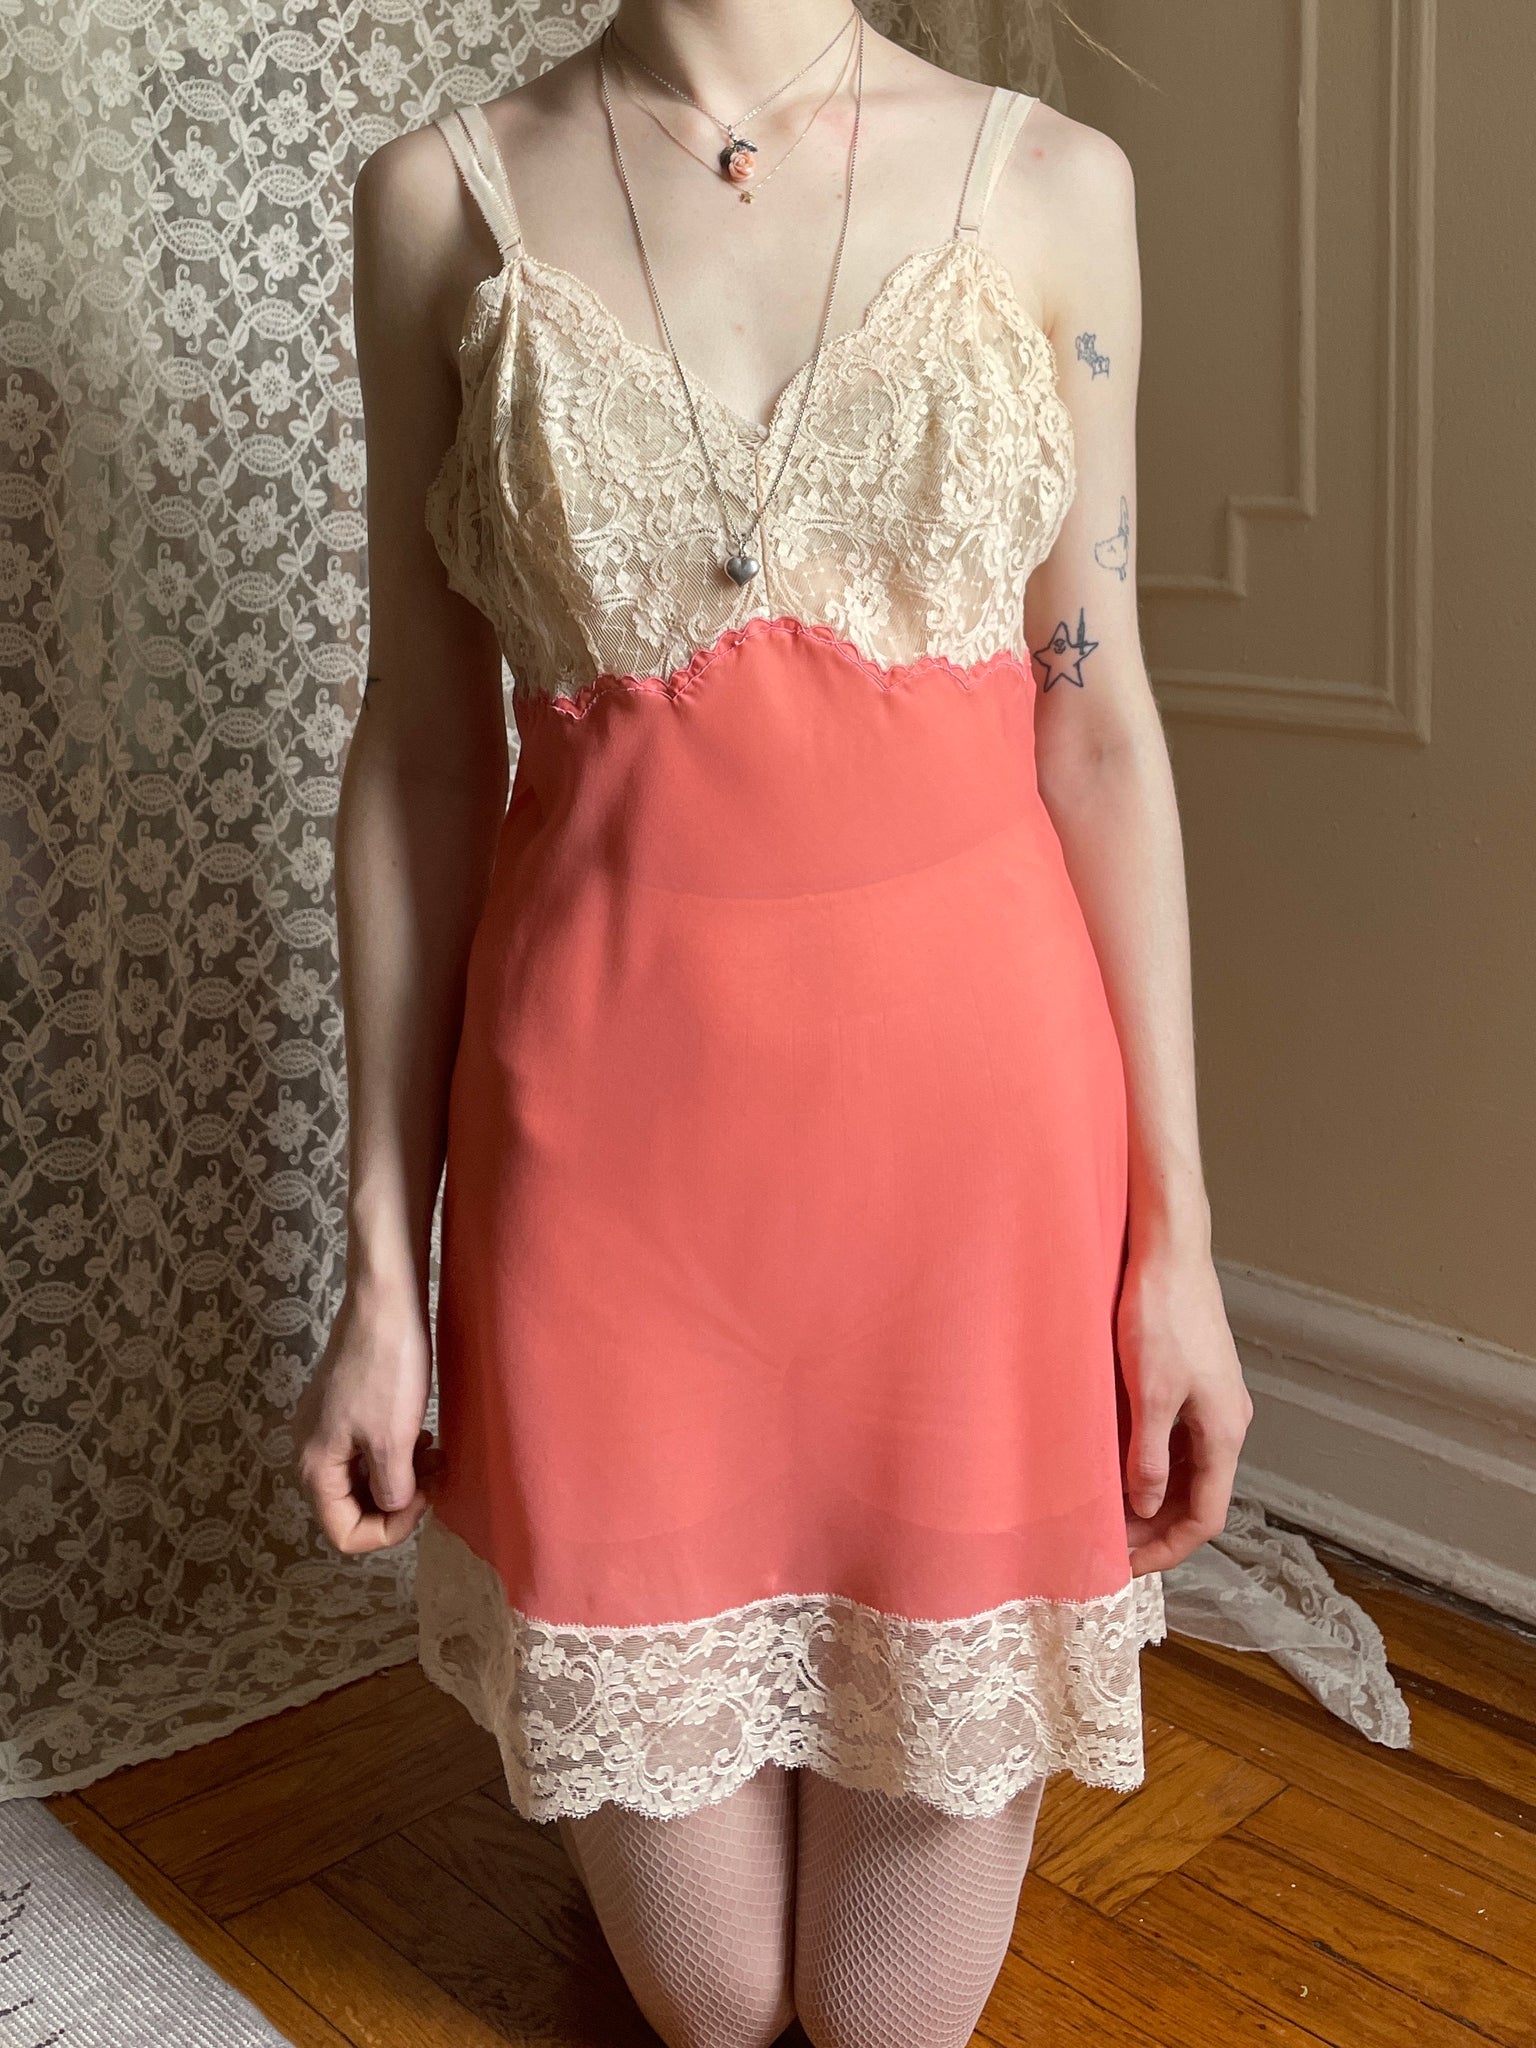 Full Slip With Lace - Nude